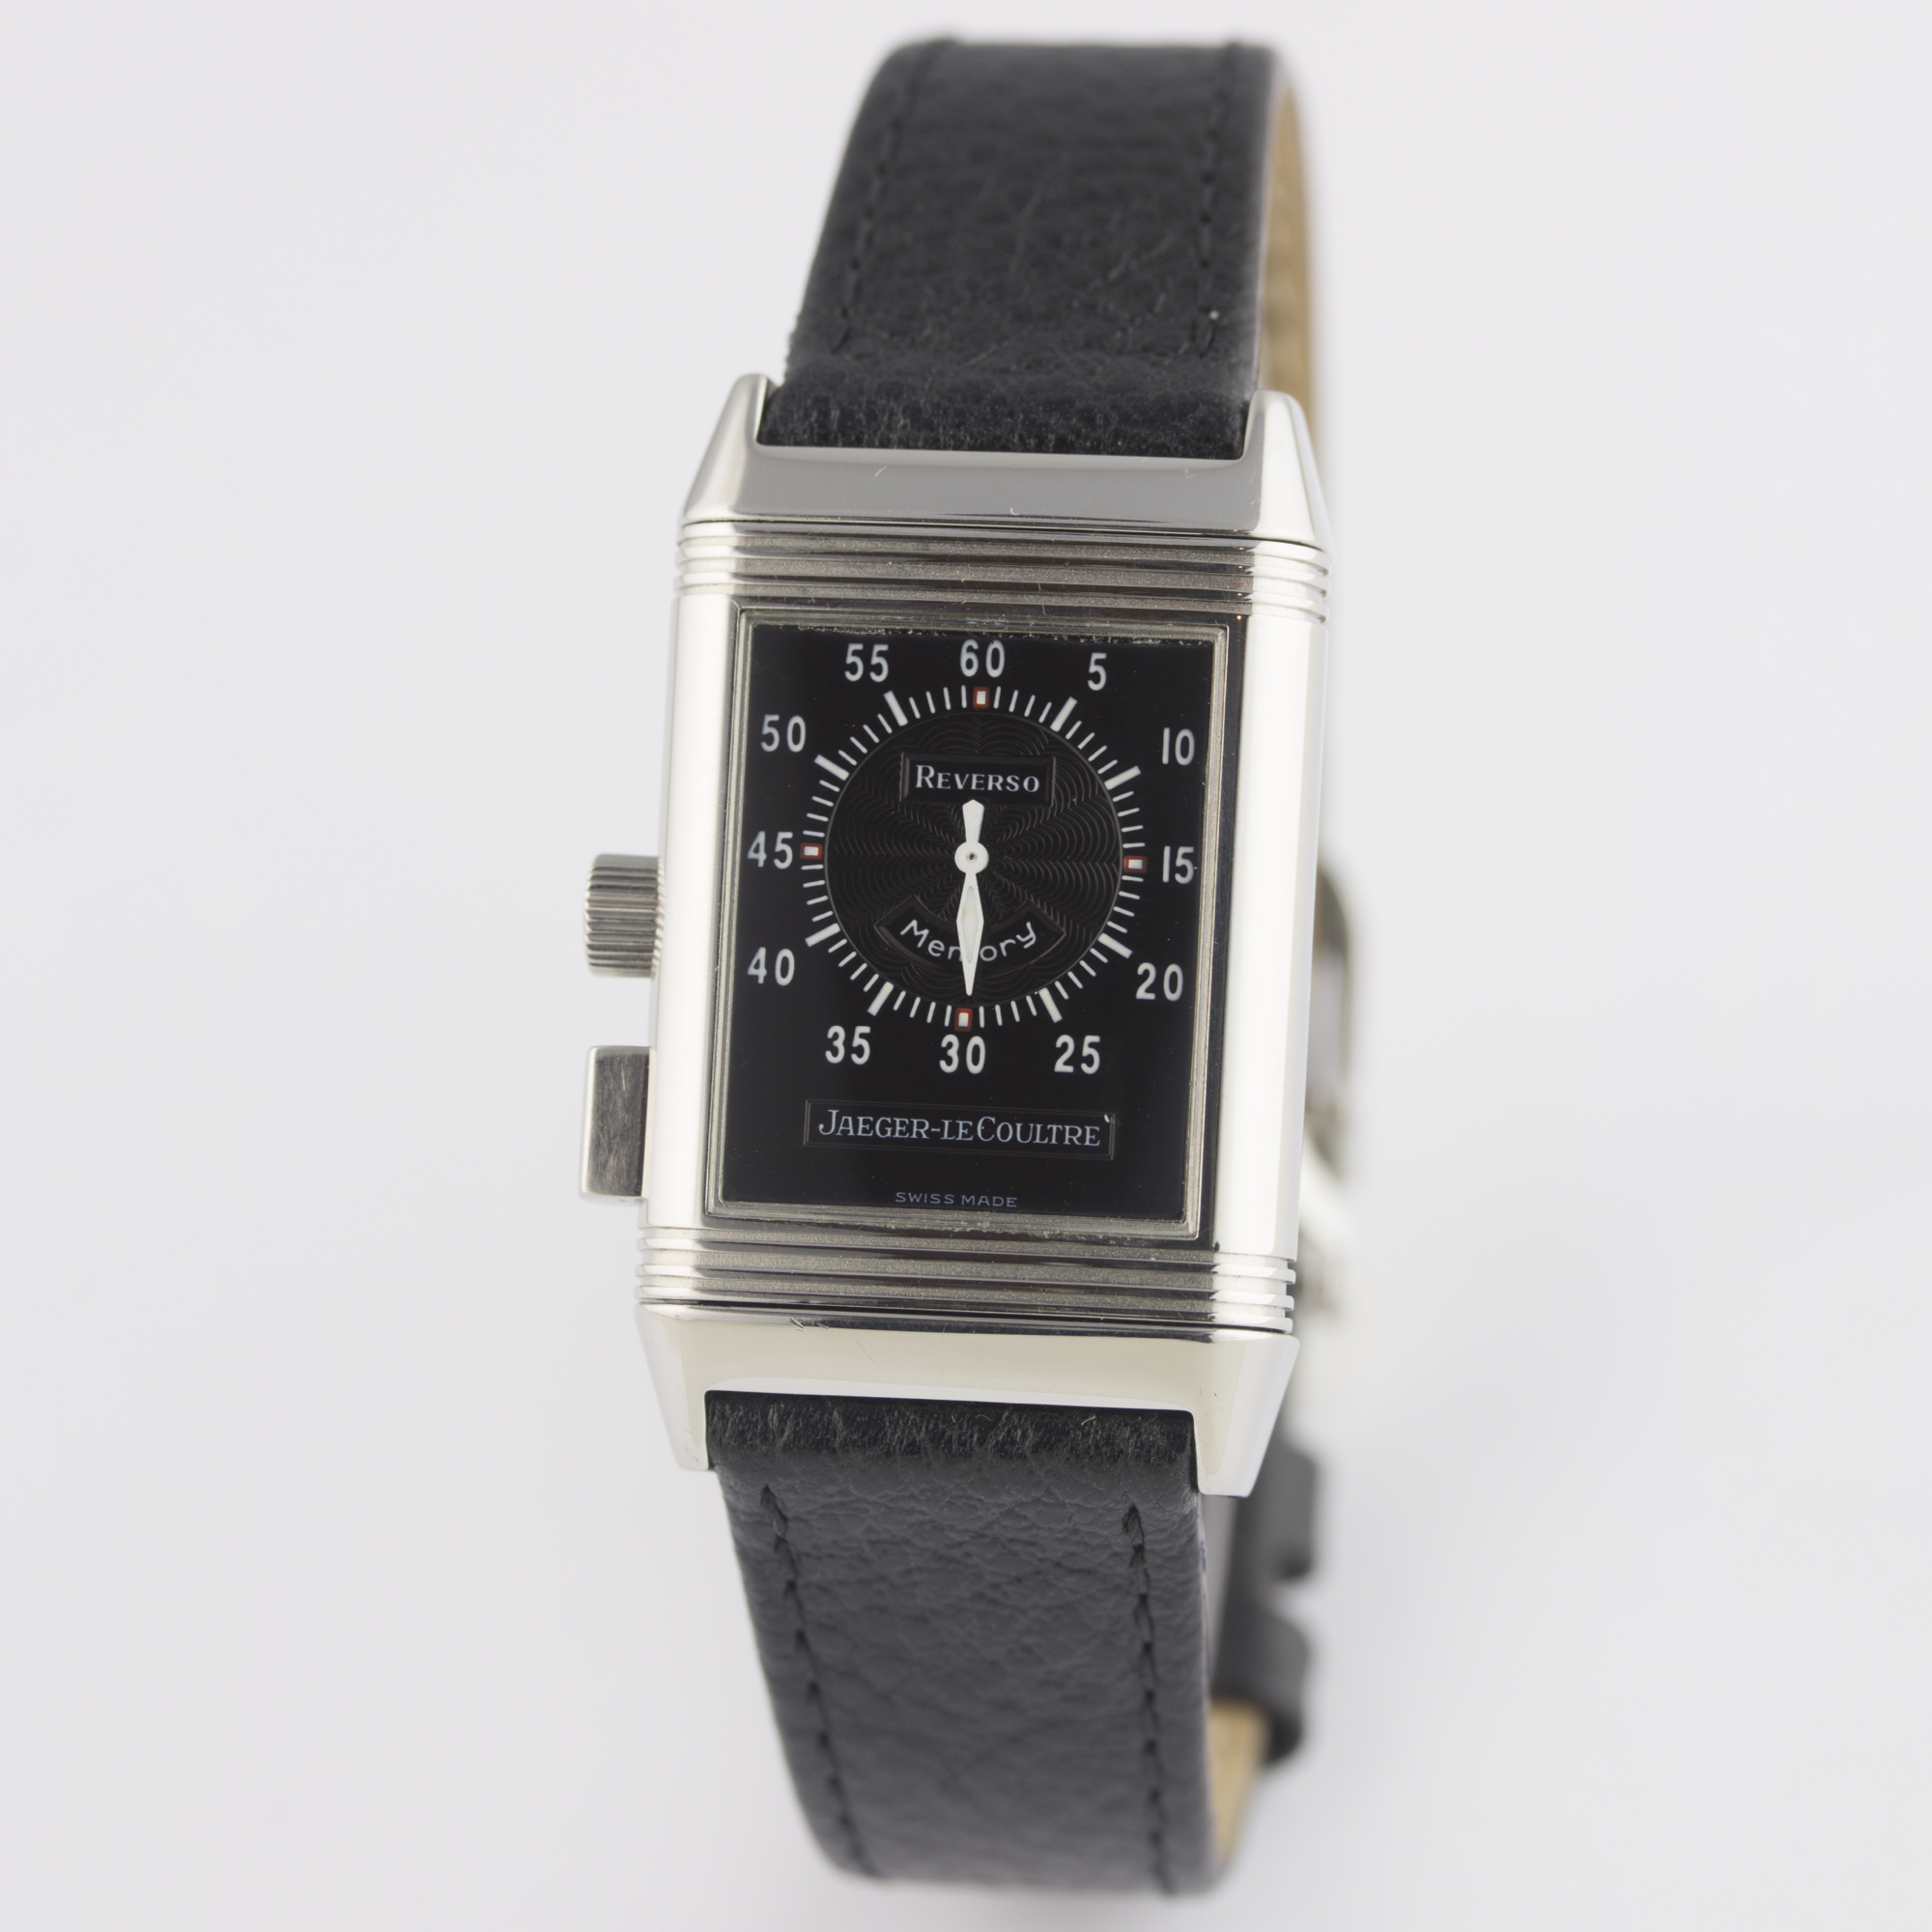 A GENTLEMAN'S STAINLESS STEEL JAEGER LECOULTRE REVERSO MEMORY WRIST WATCH DATED 2000, REF. 255.8. - Image 3 of 9